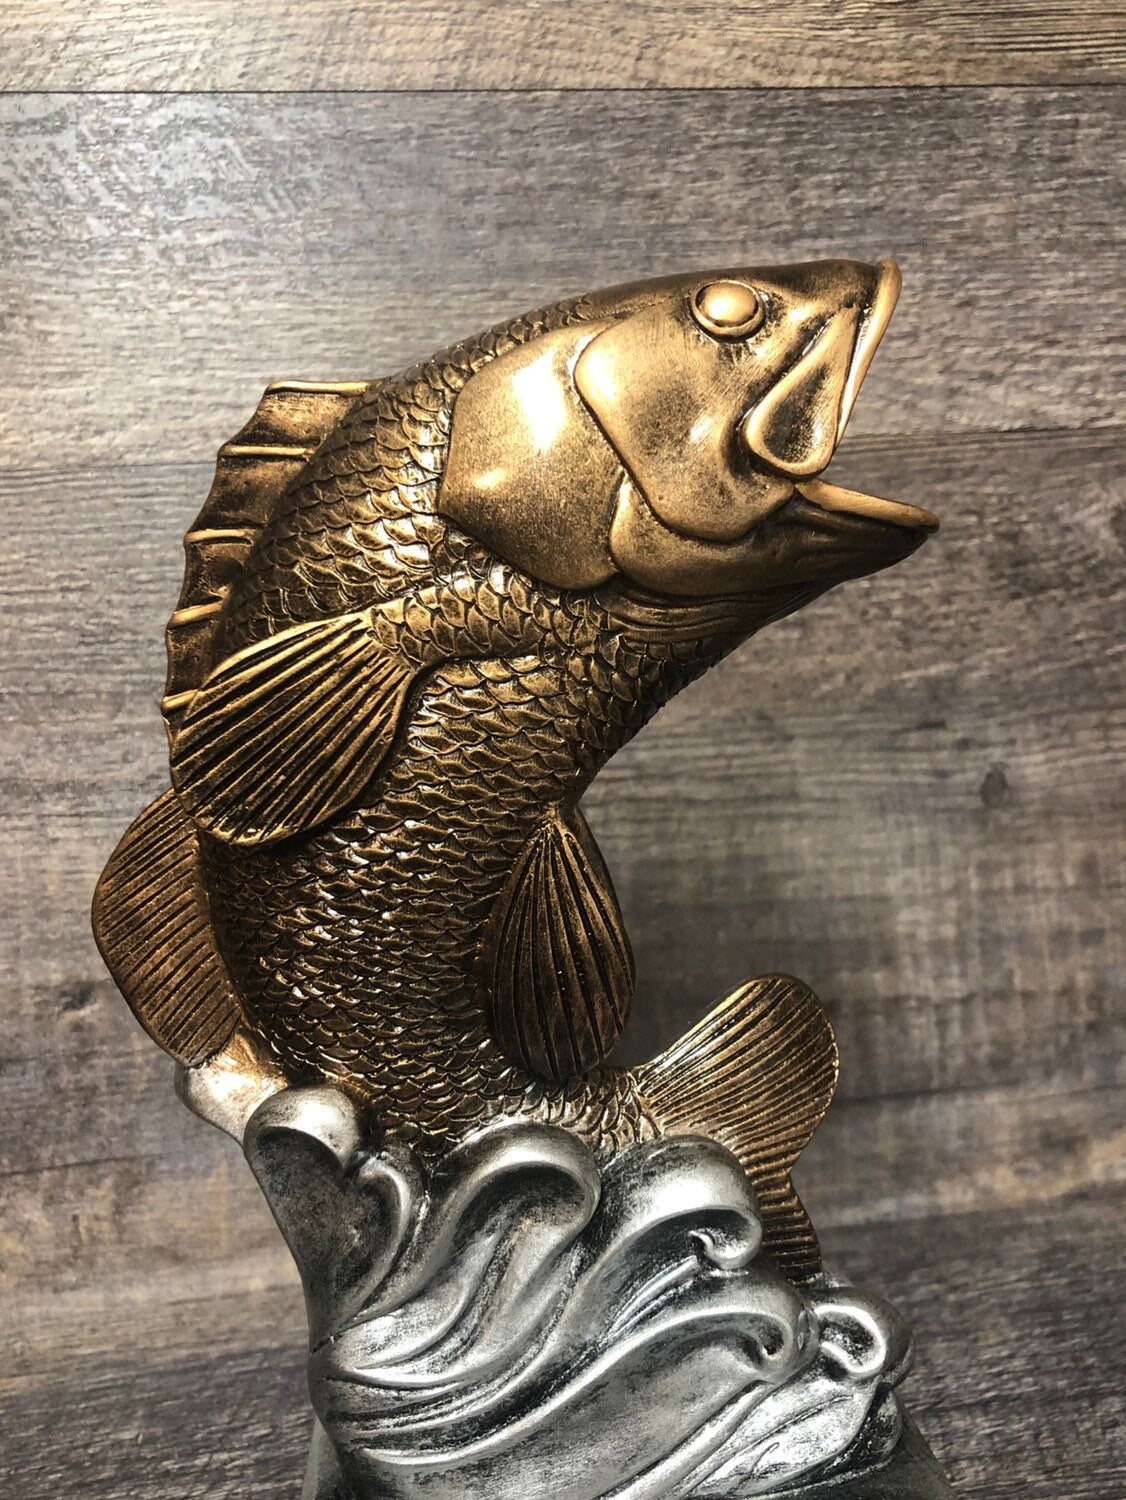 Bass Trophy Fishing Trophy Fishing Derby Tournament Trophy Award Biggest Bass Fish Personalized Trophy Biggest Fish Competition Winner